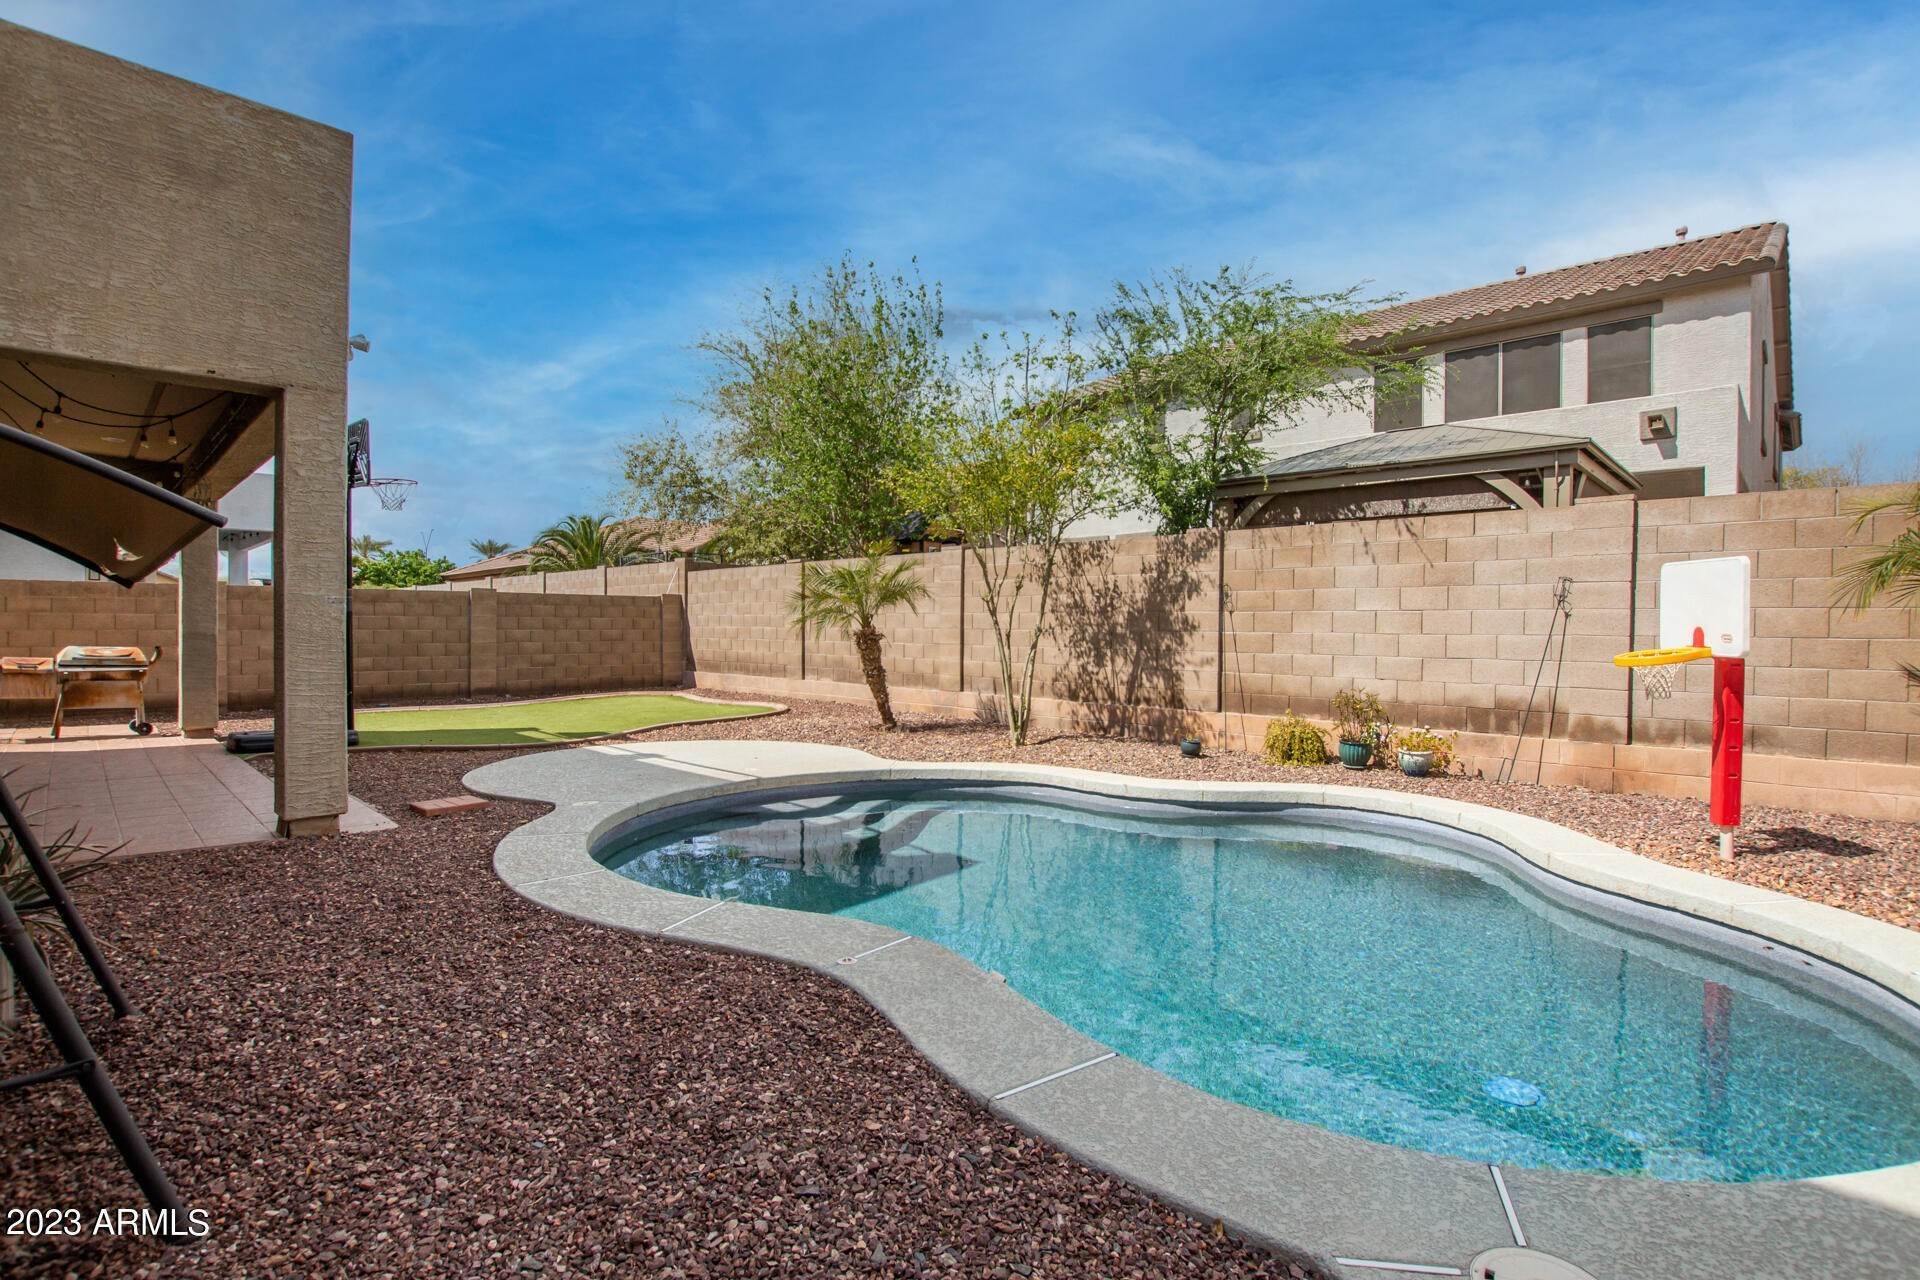 29. Single Family for Sale at Goodyear, AZ 85338